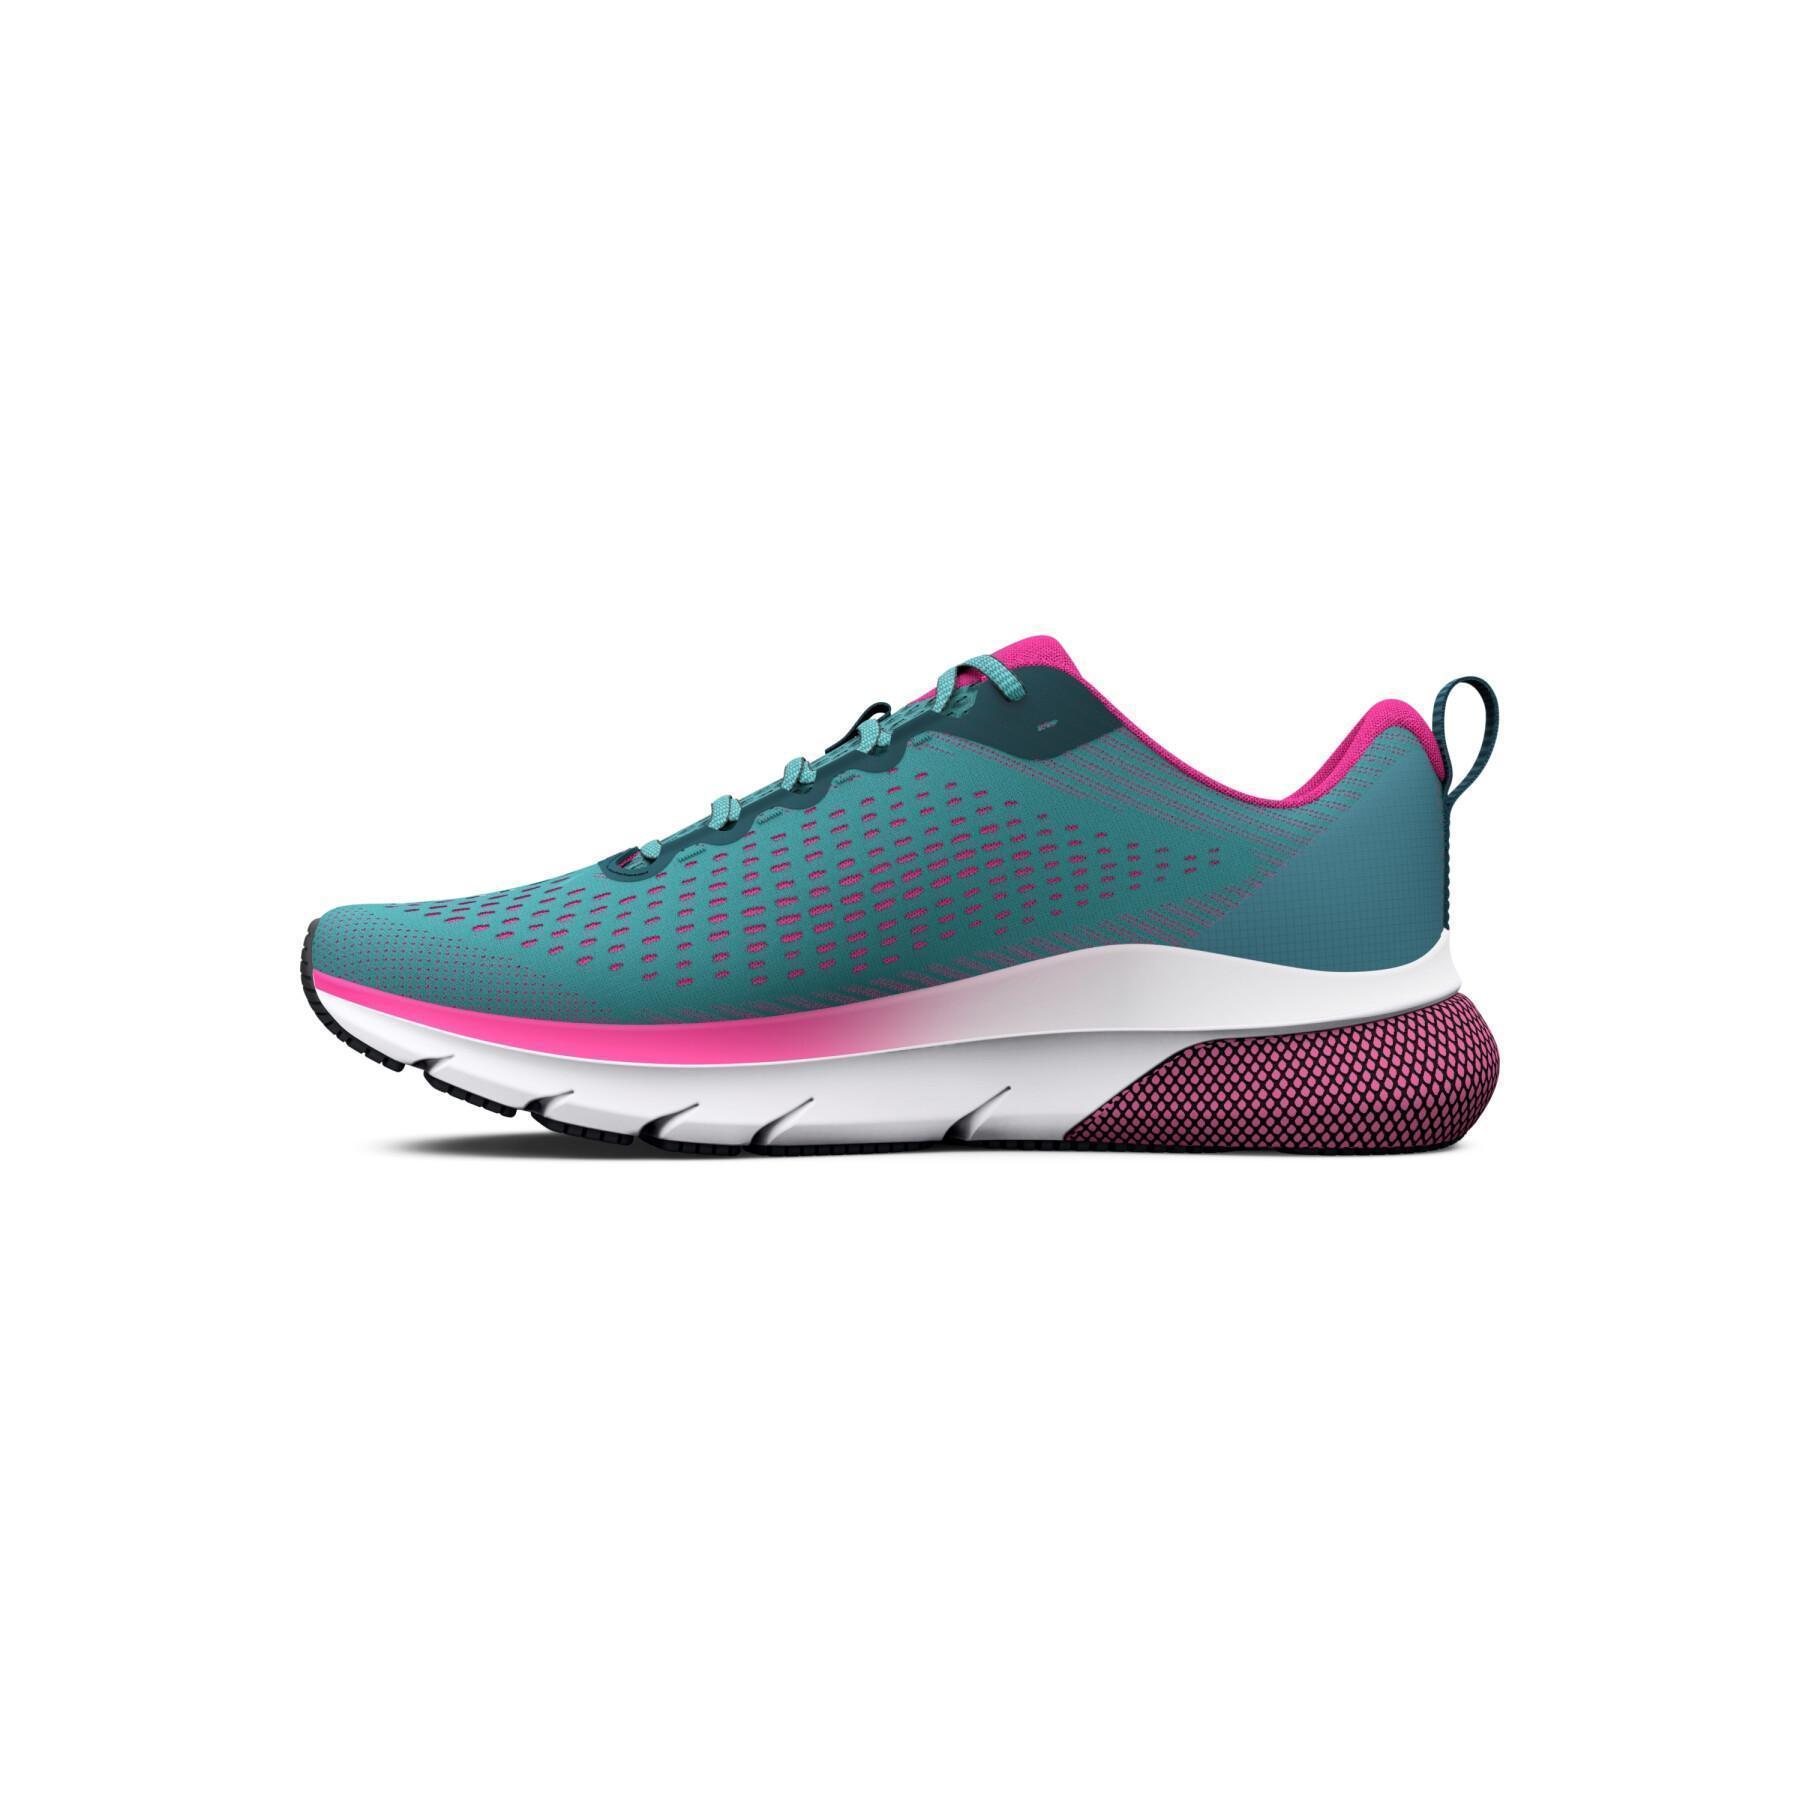 Zapatos de mujer running Under Armour HOVR™ Turbulence